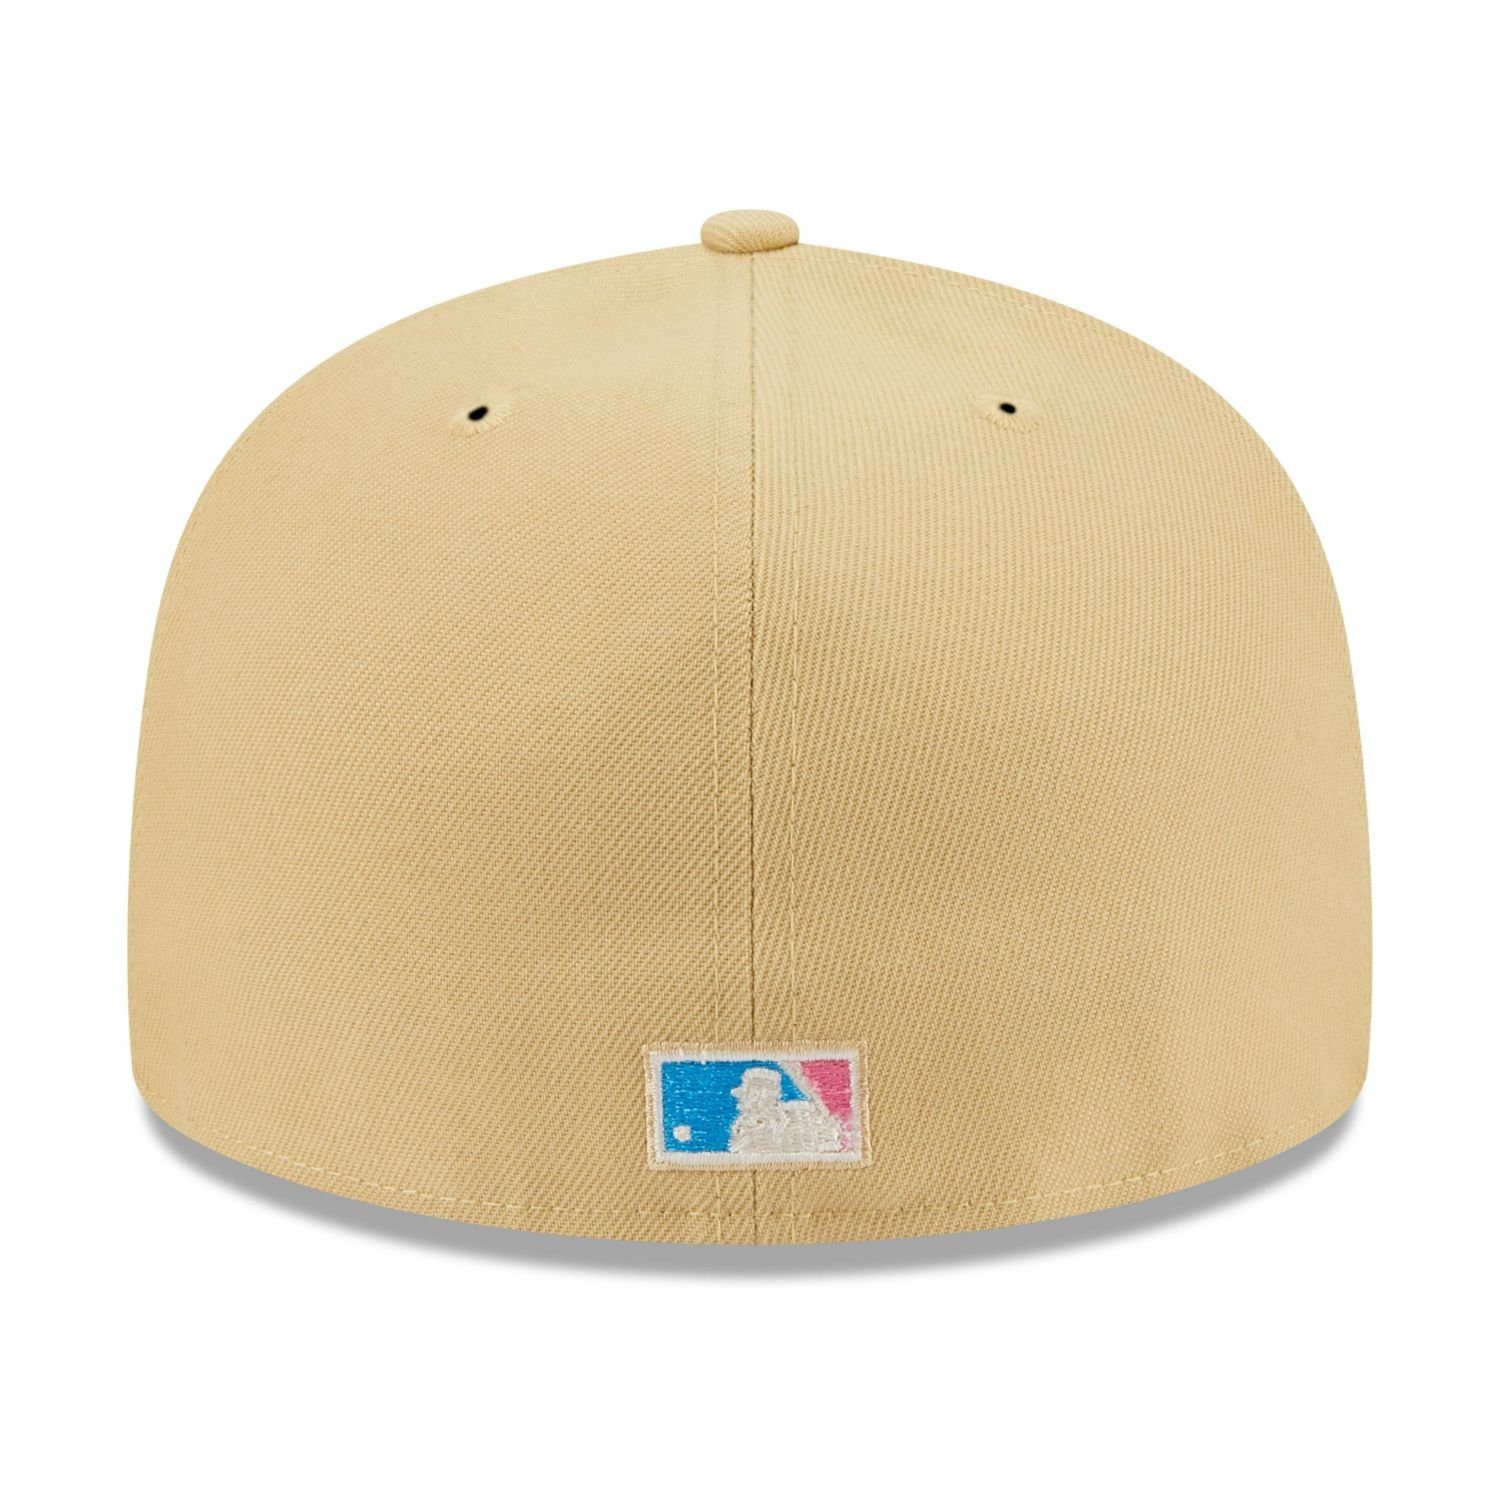 Fitted SEAM 59Fifty Era New Los Angels STITCH Angeles Cap